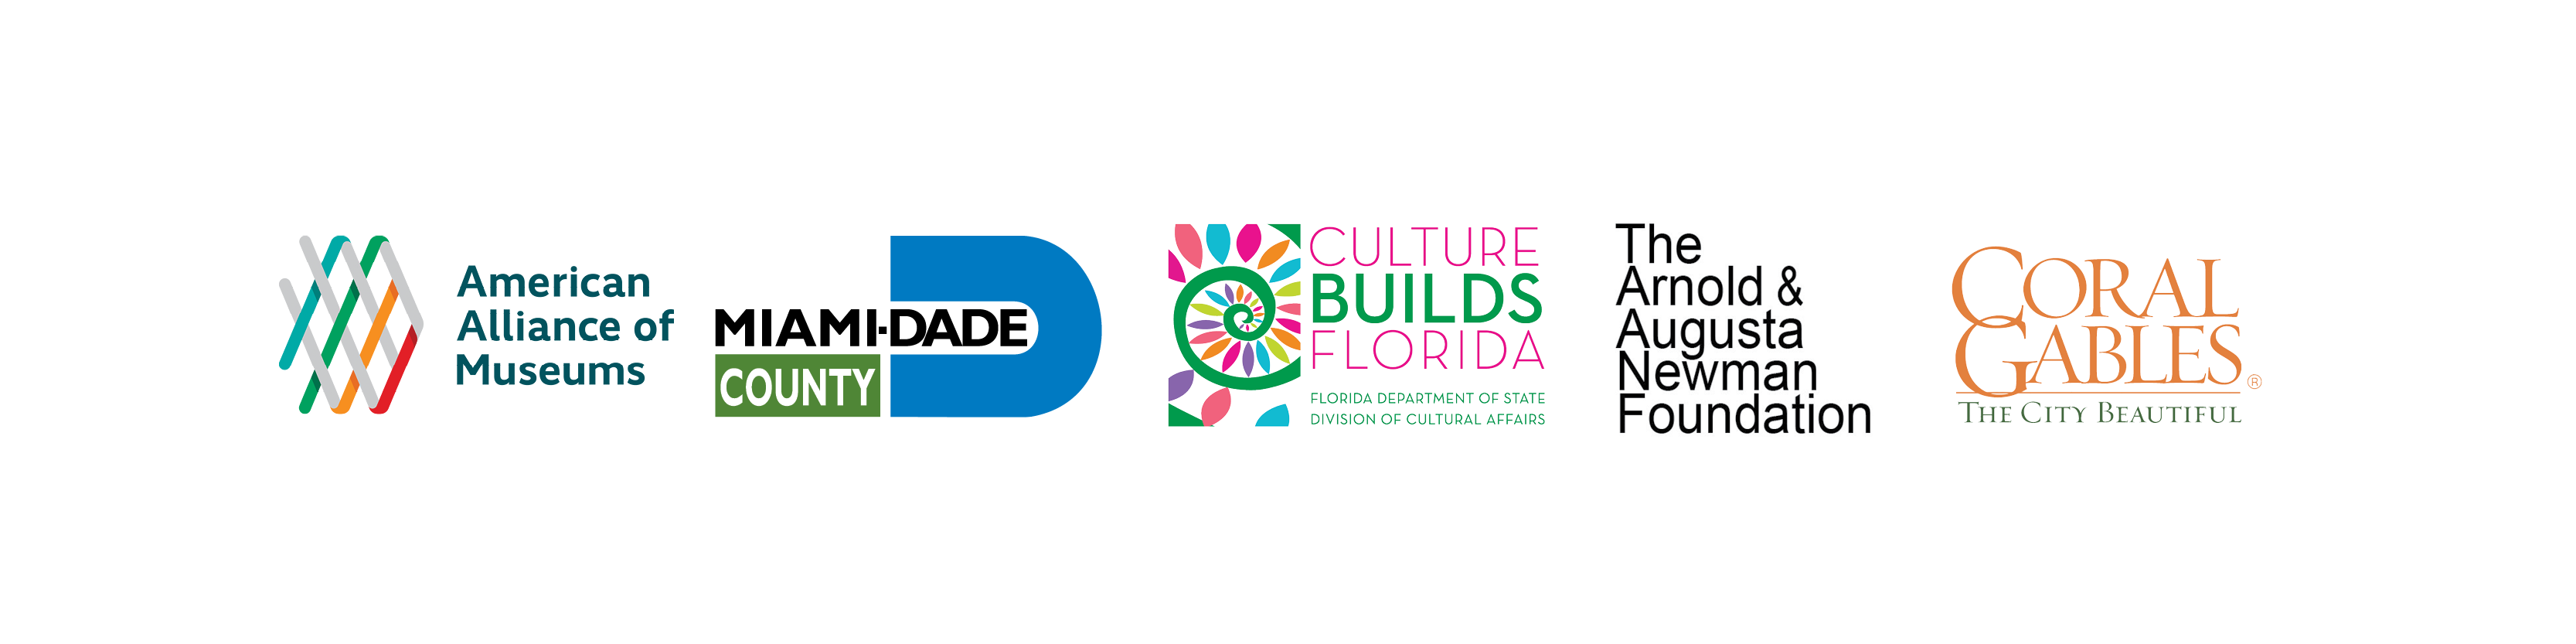 logos for American Alliance of Museums, Miami-Dade County, Florida Department of State Division of Cultural Affairs, Arnold & Augusta Newman Foundation, and the City of Coral Gables